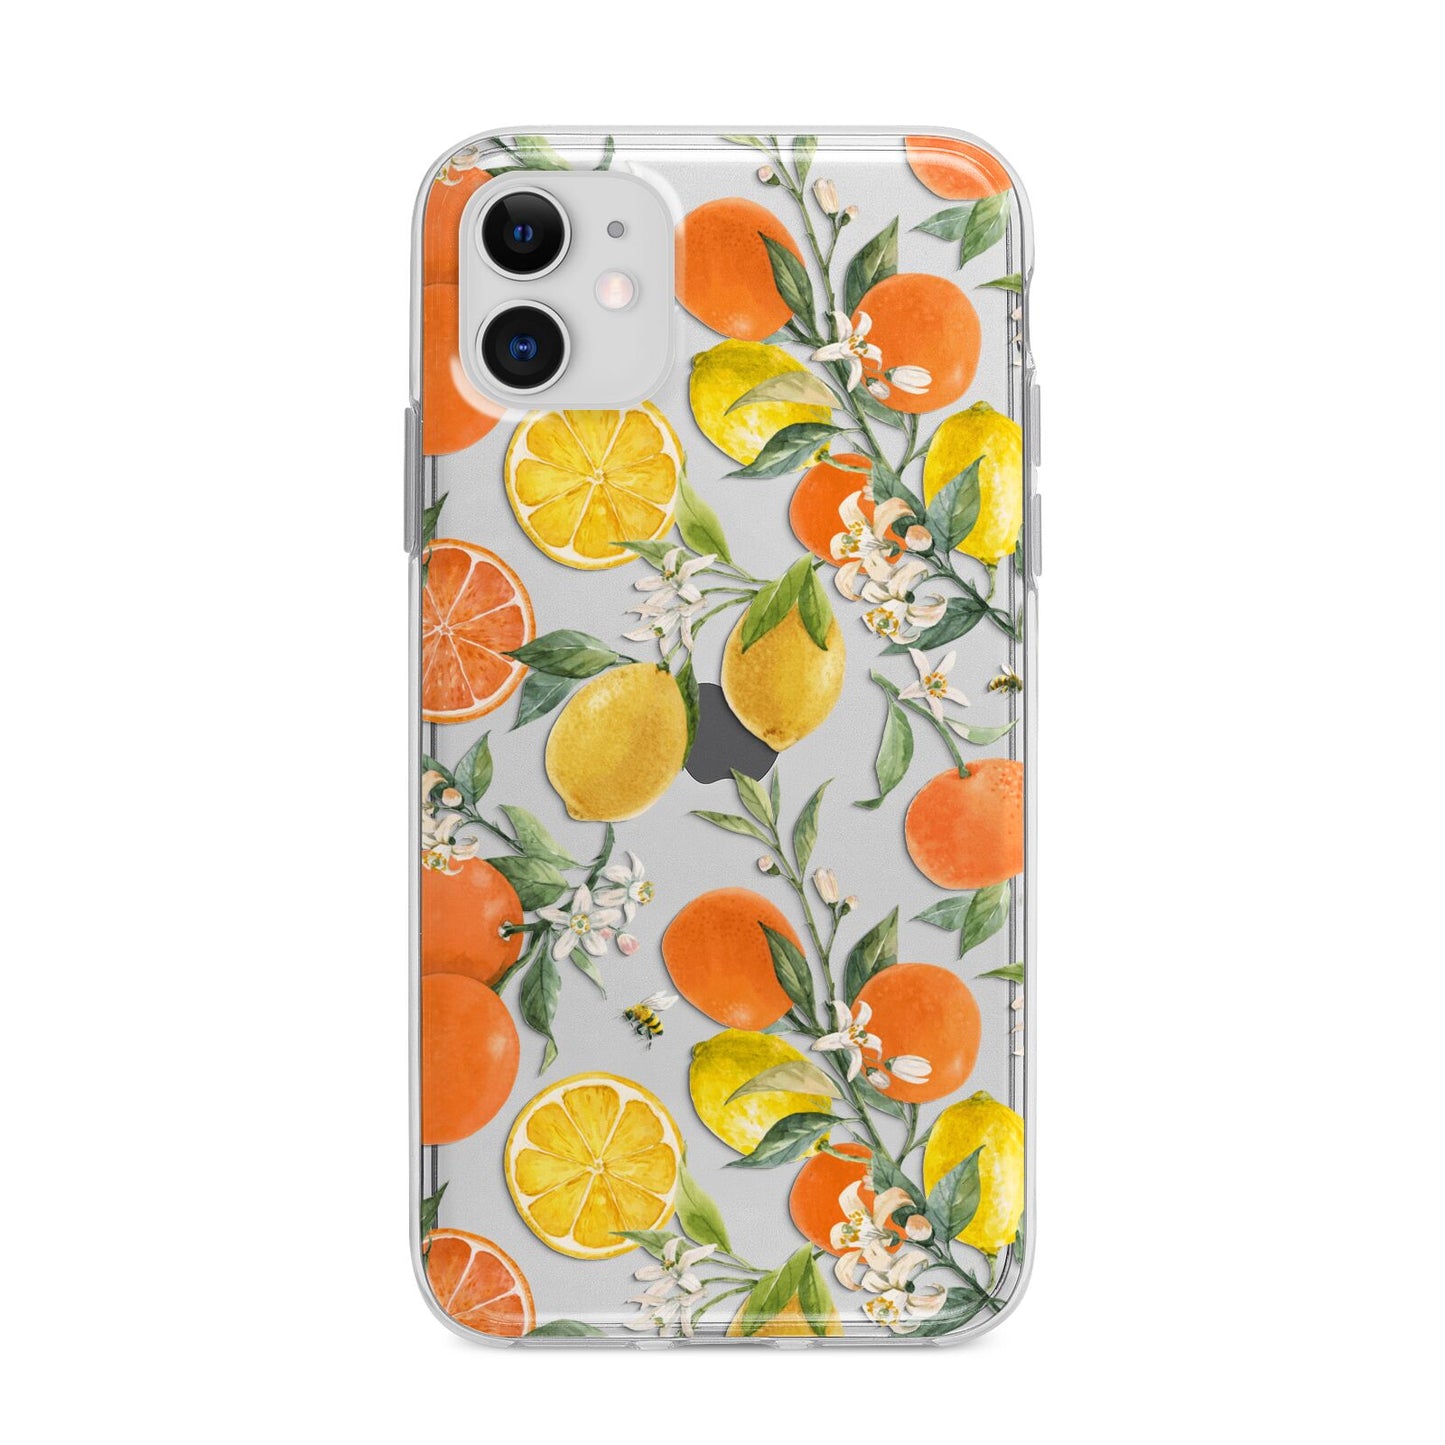 Lemons and Oranges Apple iPhone 11 in White with Bumper Case